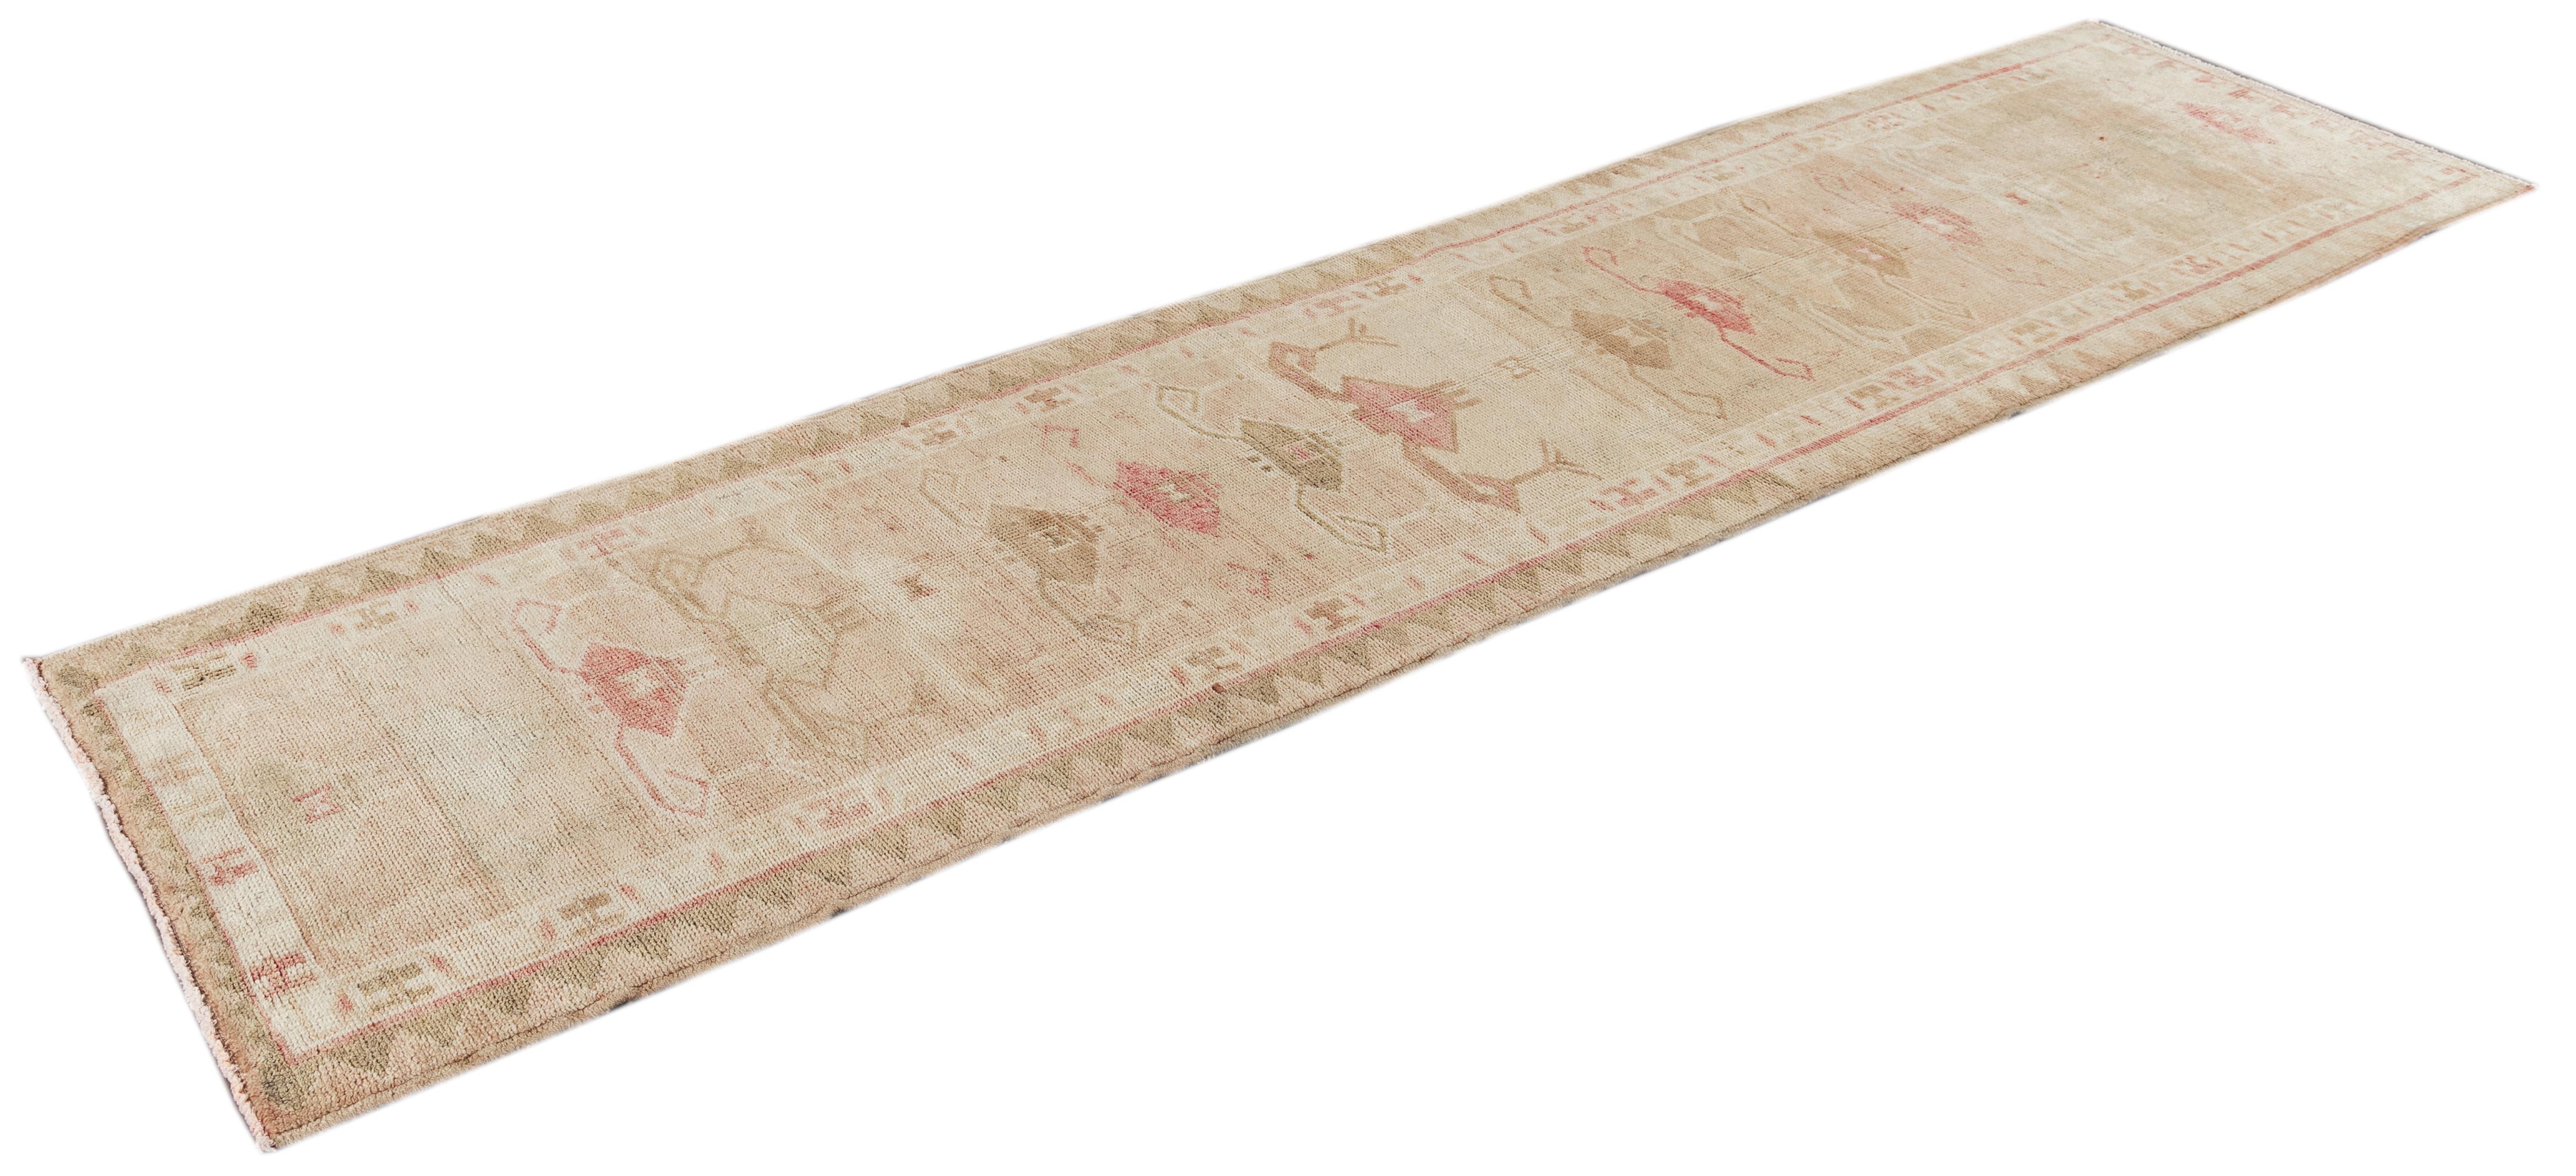 Beautiful Anatolian Village Turkish Runner rug, hand knotted with a tan field, ivory, light brown and pink accents in all-over geometric medallion design.

 This rug measures 2' 10